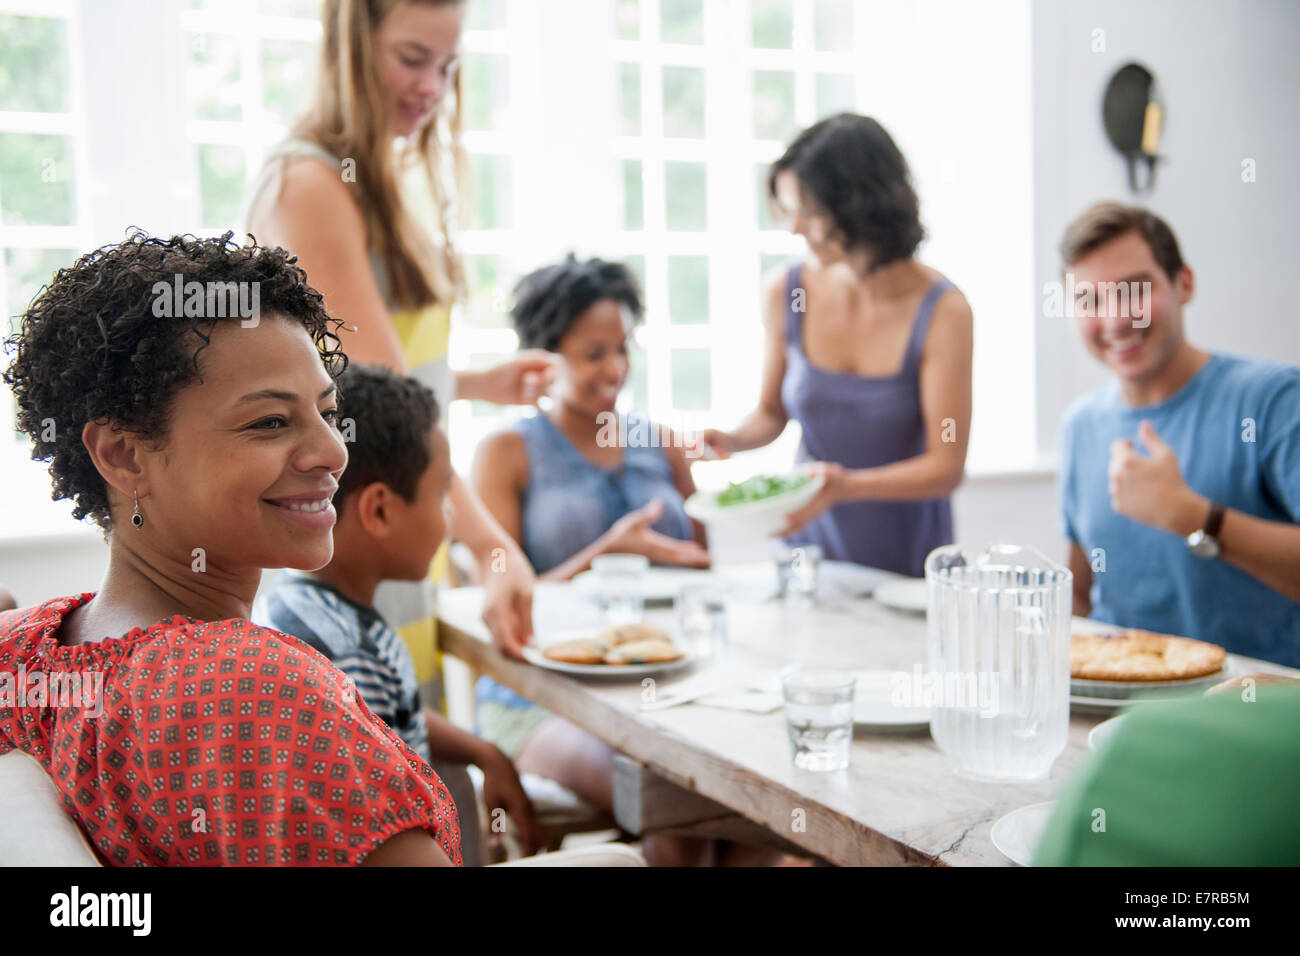 A family gathering for a meal. Adults and children around a table. Stock Photo